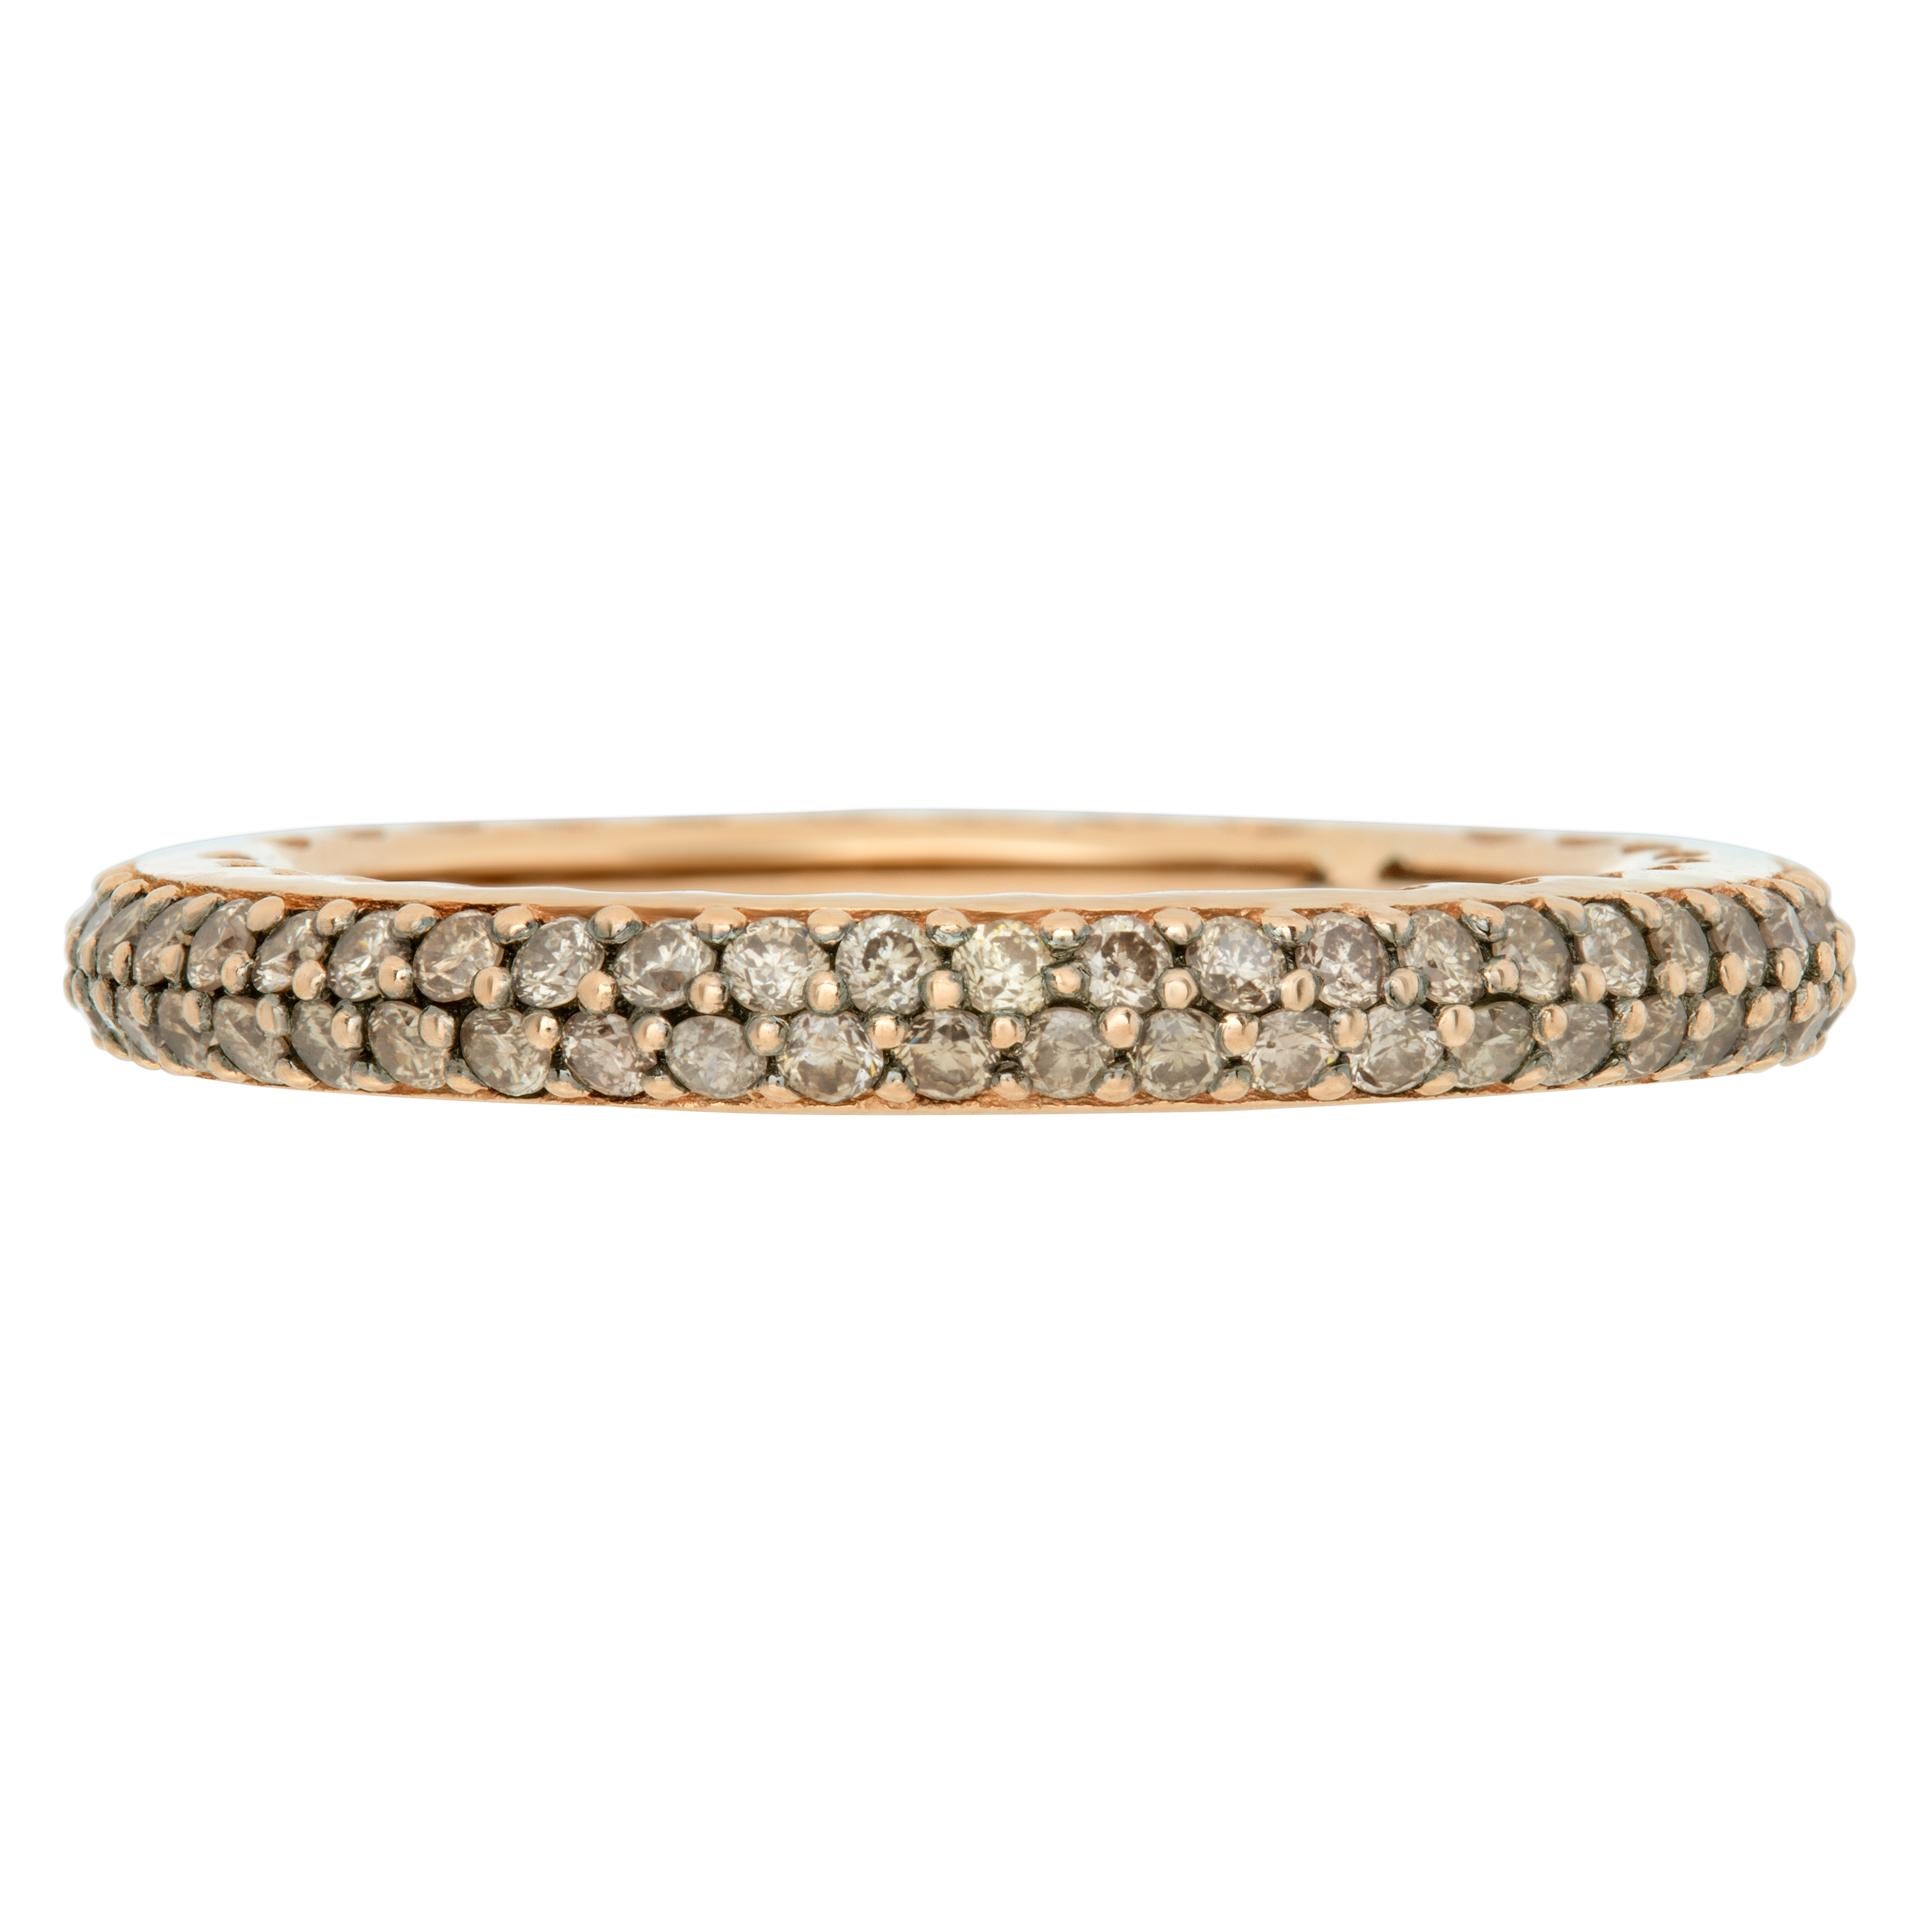 18k rose gold champaign diamonds eternity band with approximately 1 carat in champagne diamonds. Fits 6-6.5 size.This Diamond ring is currently size 6 and some items can be sized up or down, please ask! It weighs 2.7 pennyweights and is 18k rose